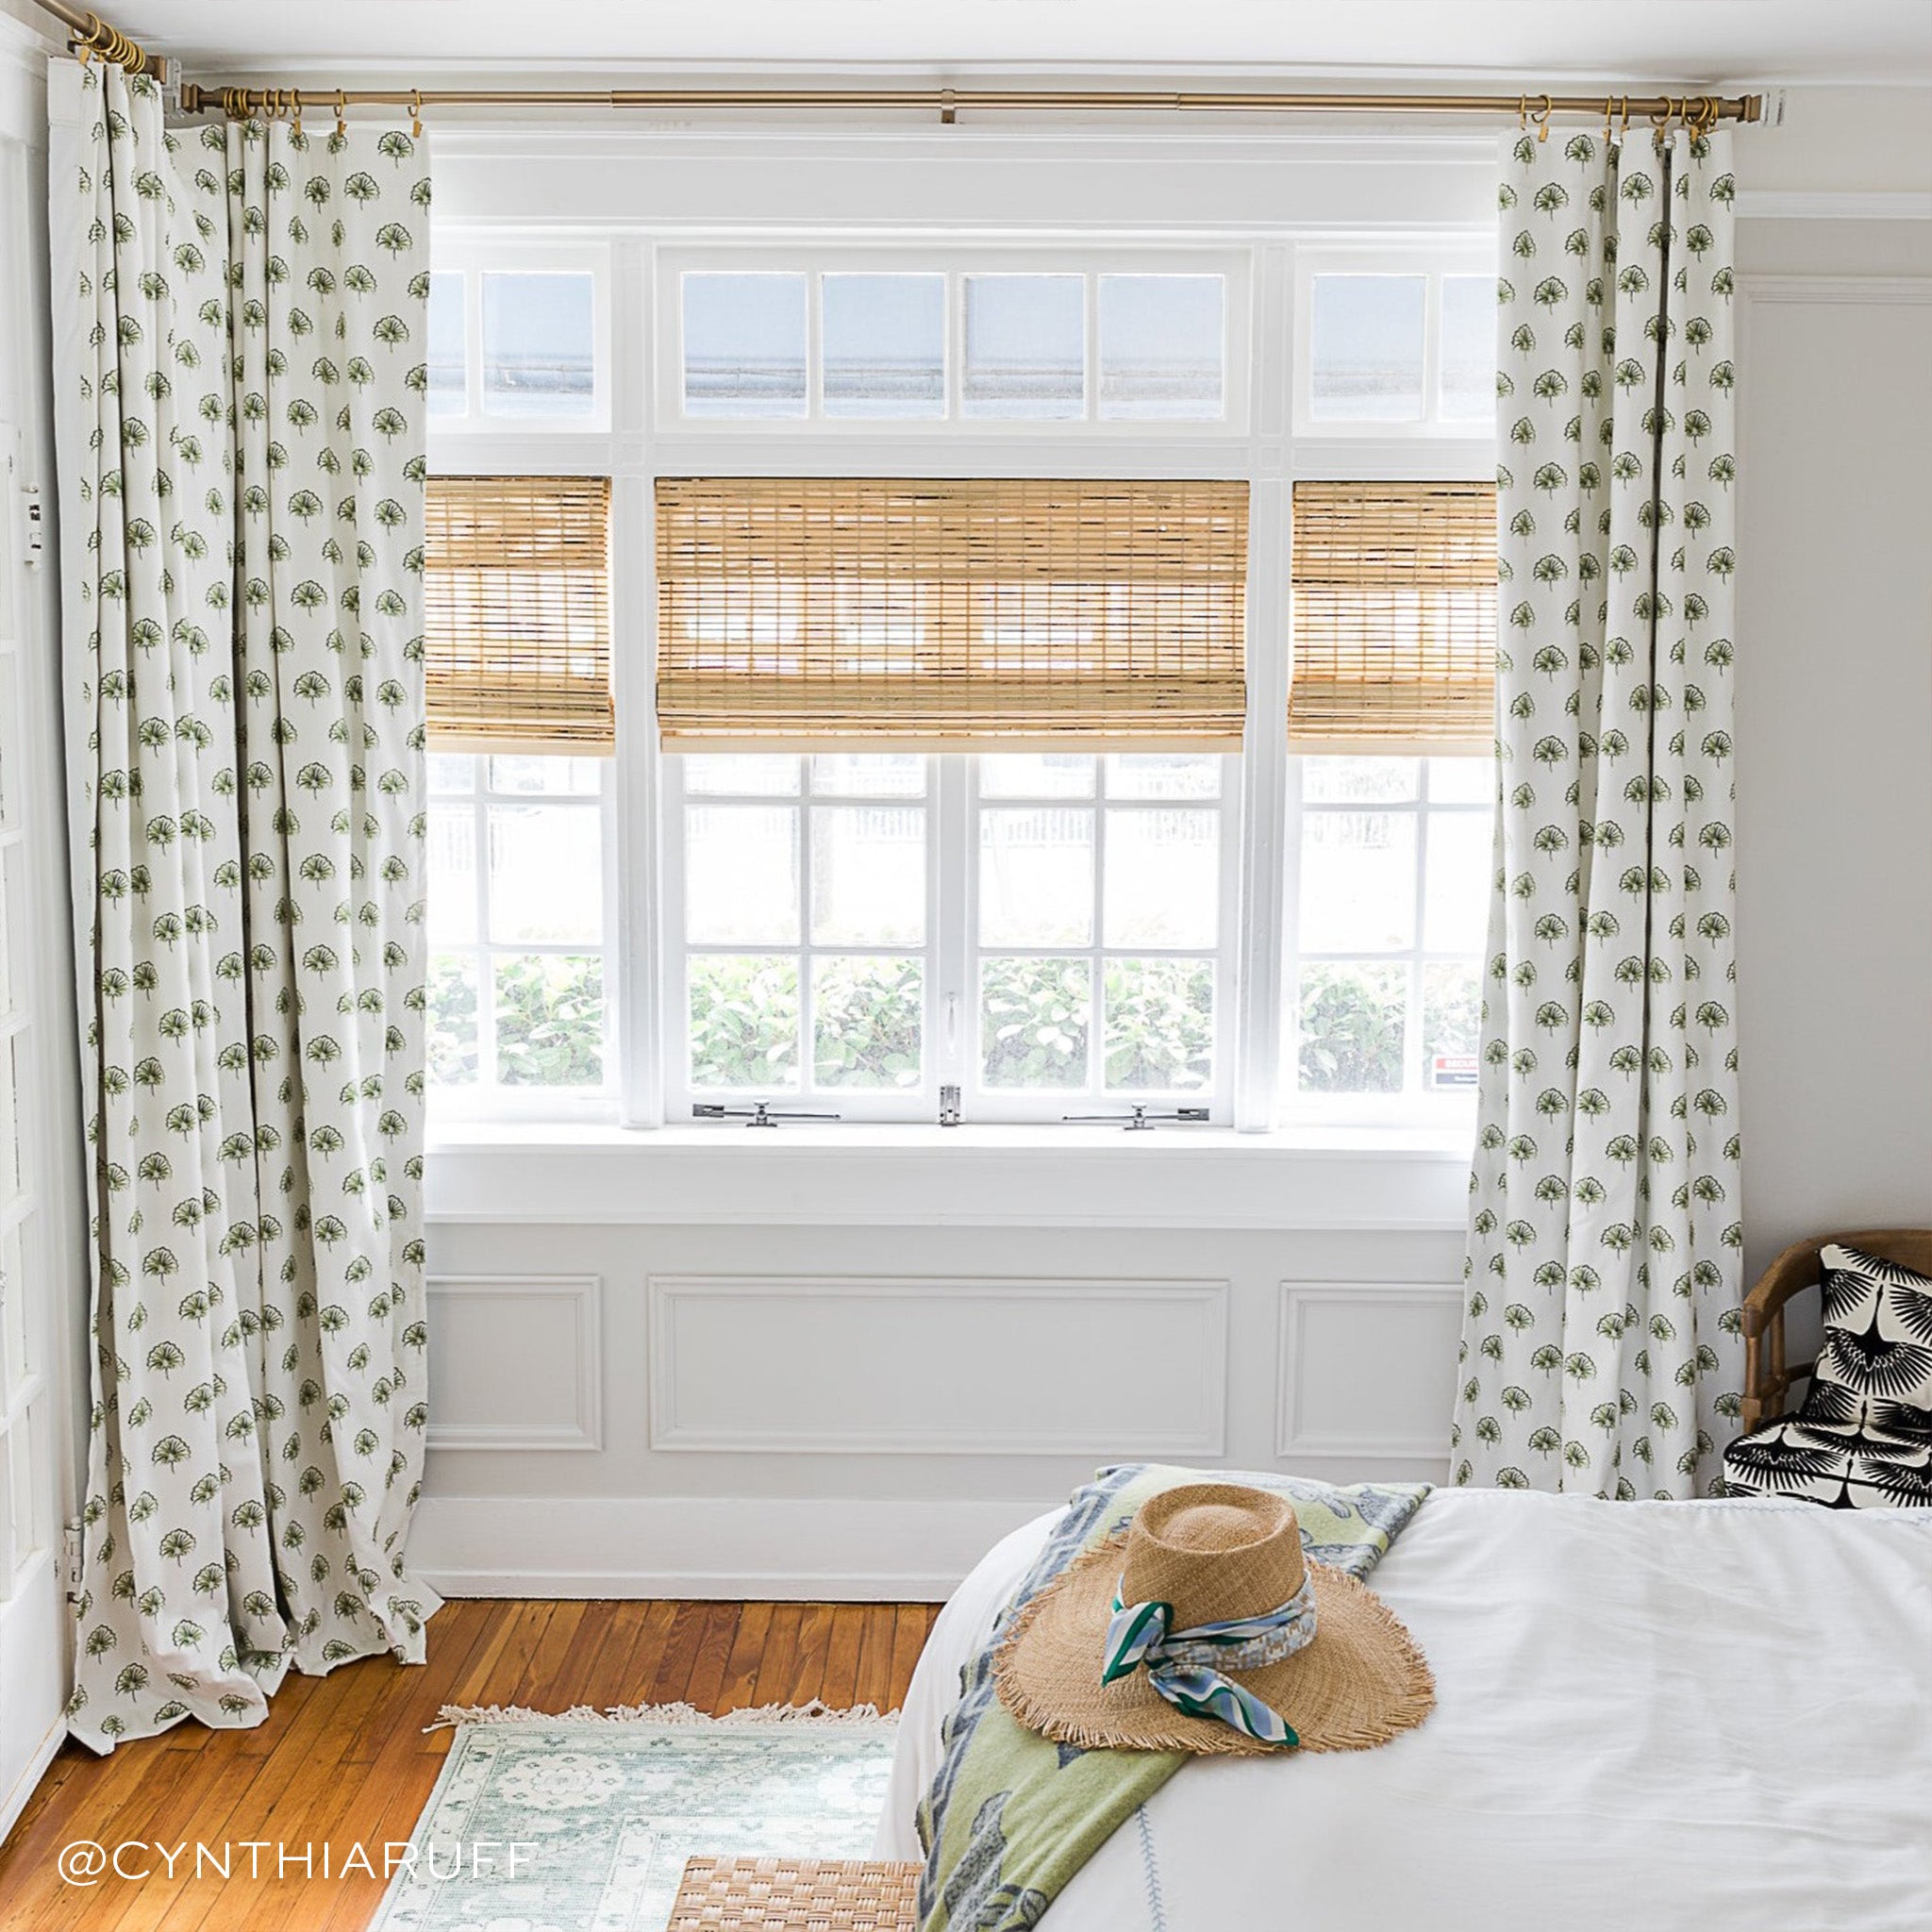 Illuminated window styled with Green Floral Printed Curtain next to white bed with beach hat on top. Photo taken by Cynthia Ruff